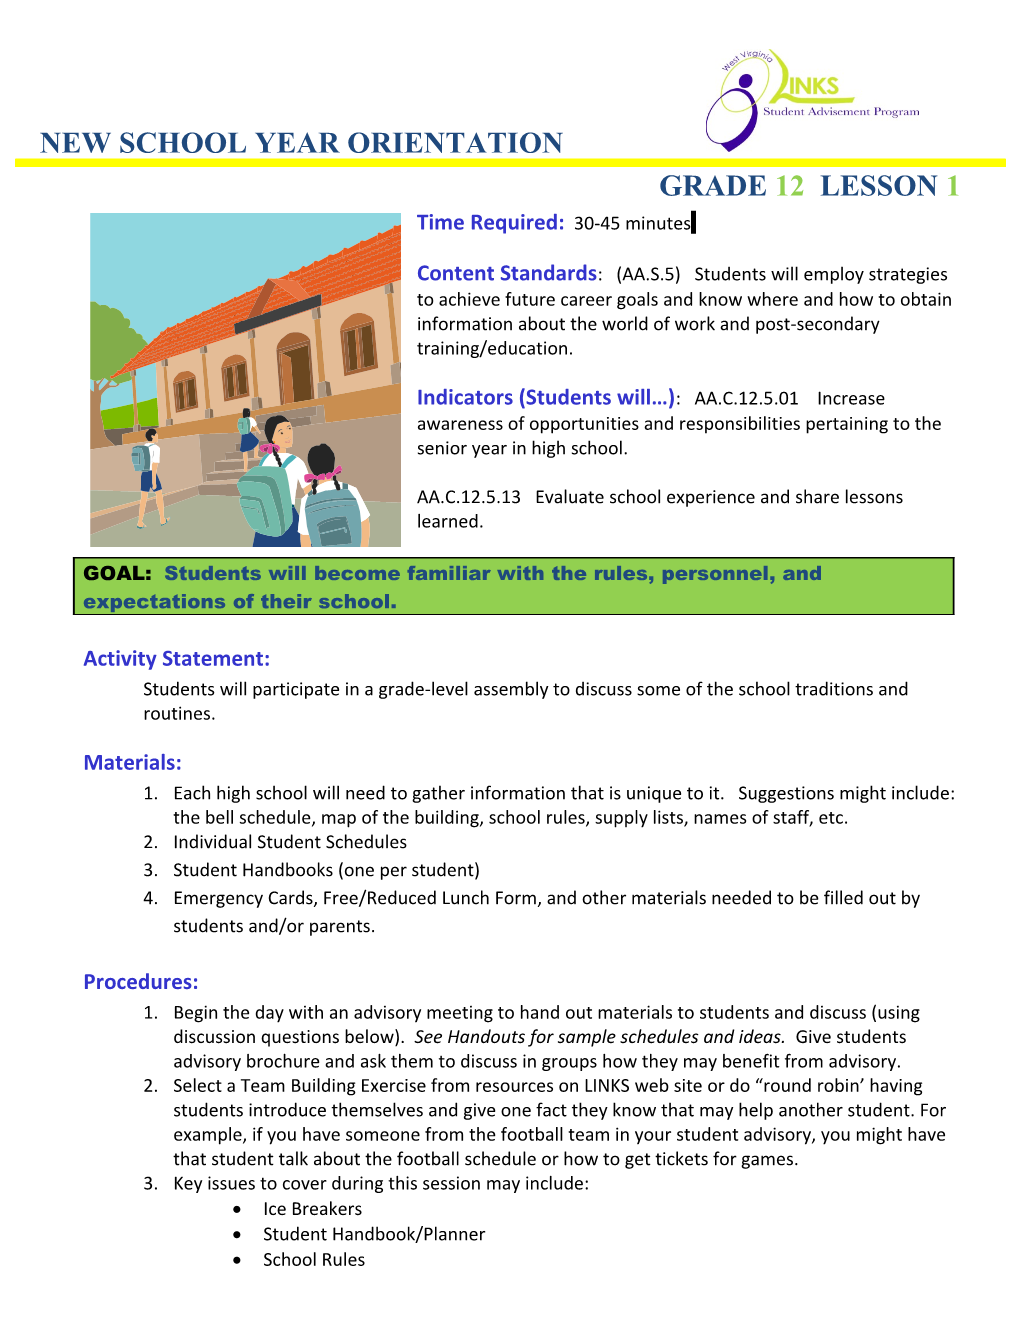 AA.C.12.5.13 Evaluate School Experience and Share Lessons Learned